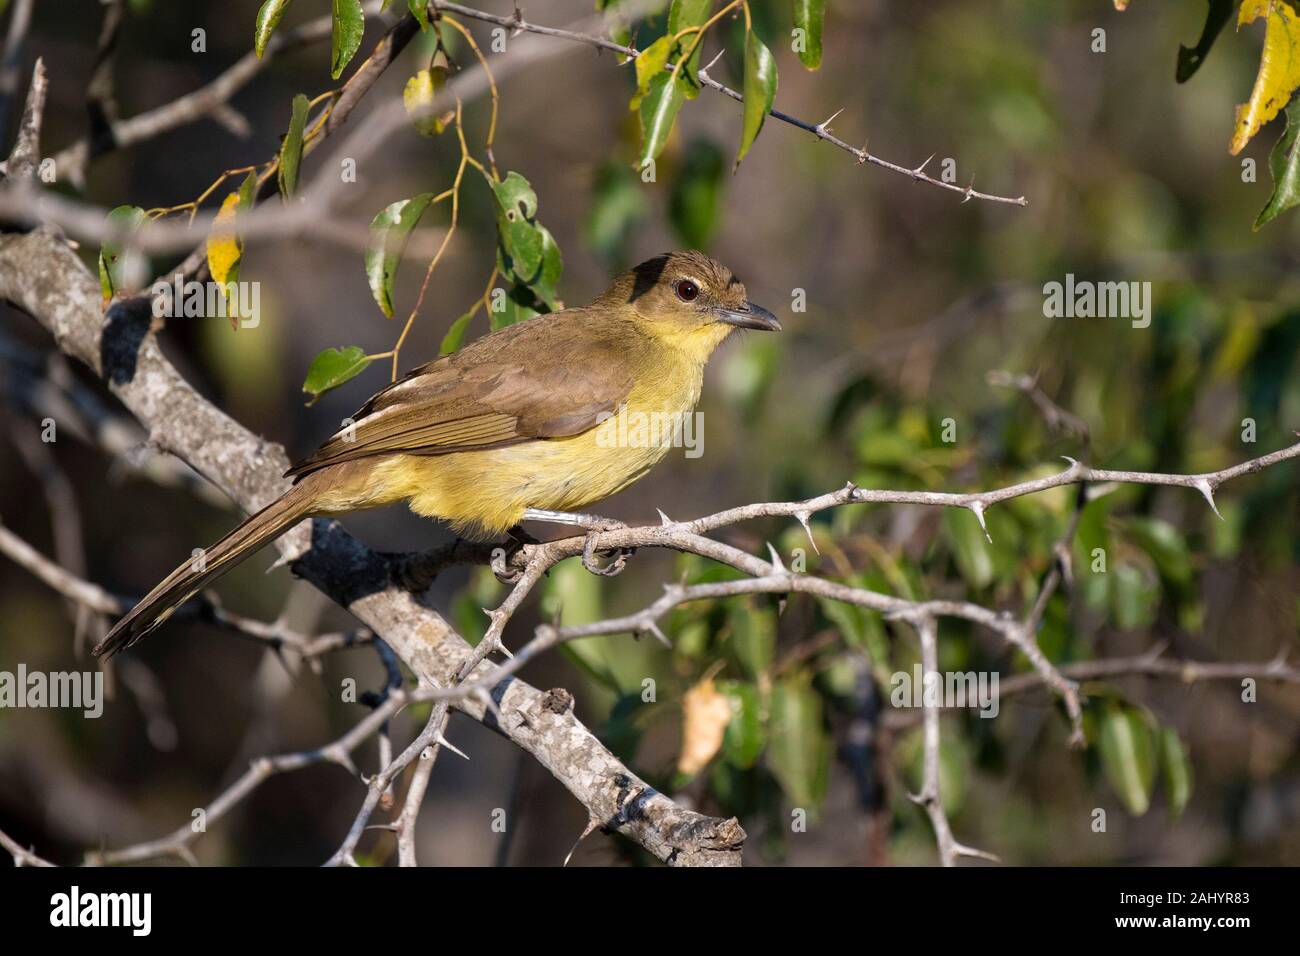 Yellow-bellied greenbul, Chlorocichla flaviventris, uMkhuze Game Reserve, South Africa Stock Photo